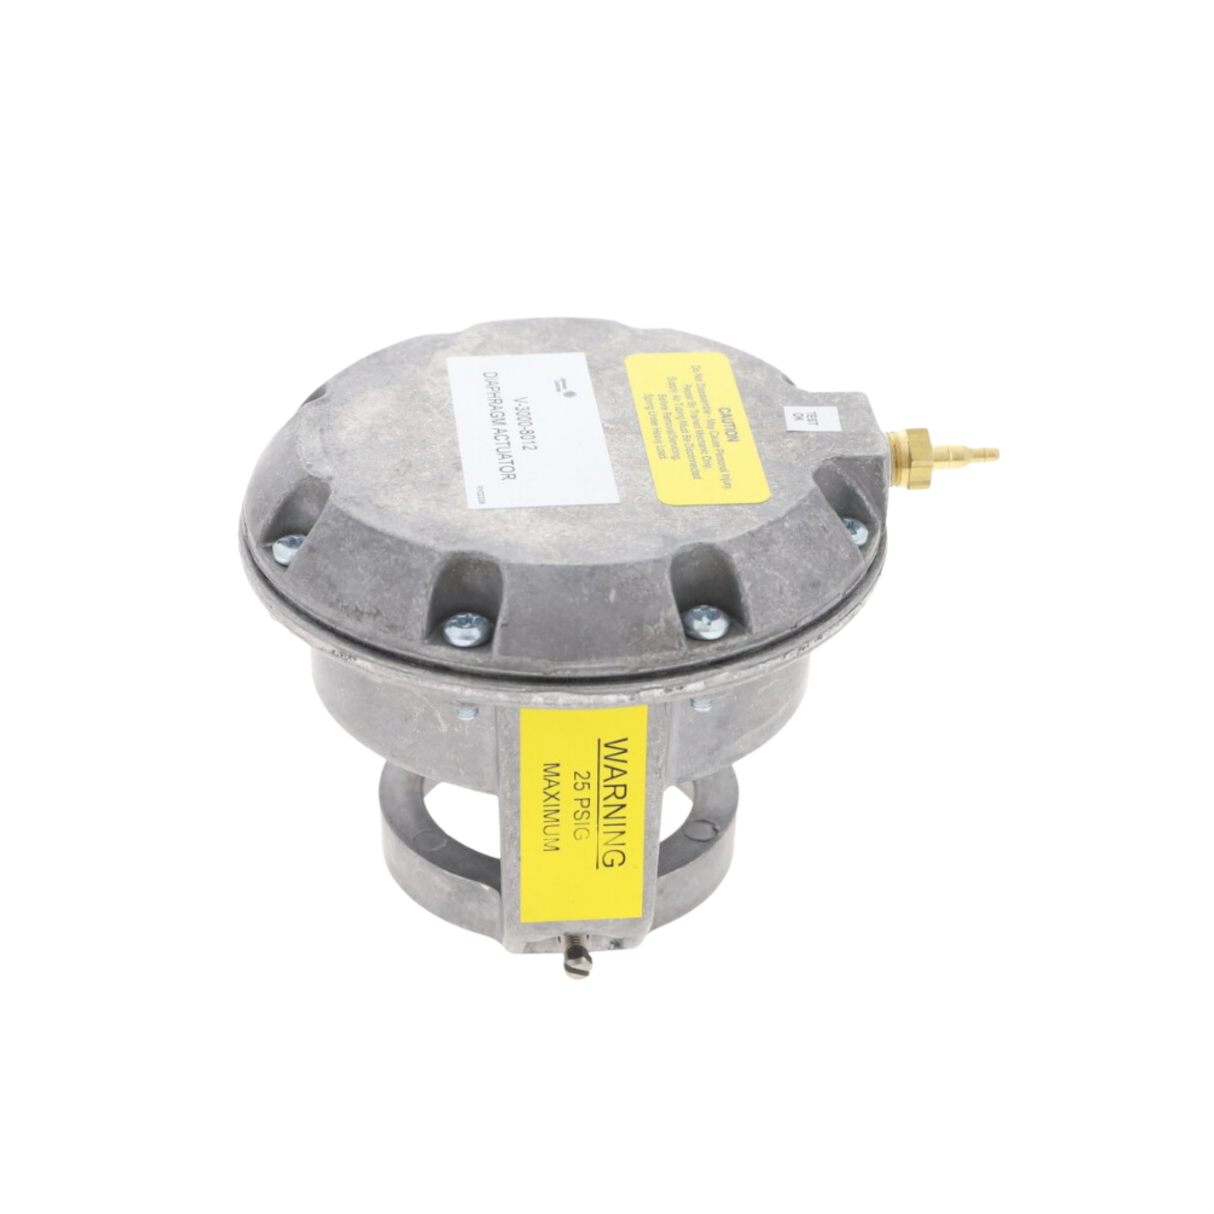 Johnson Controls V-3000-8012 Pneumatic Valve Actuator with 1/4" or 5/32" Outside Diameter Barbed Air Connection (3-6 PSI, 4-8 PSI, or 9-13 PSI range depending on Spring Kit used) and Exposed Yoke